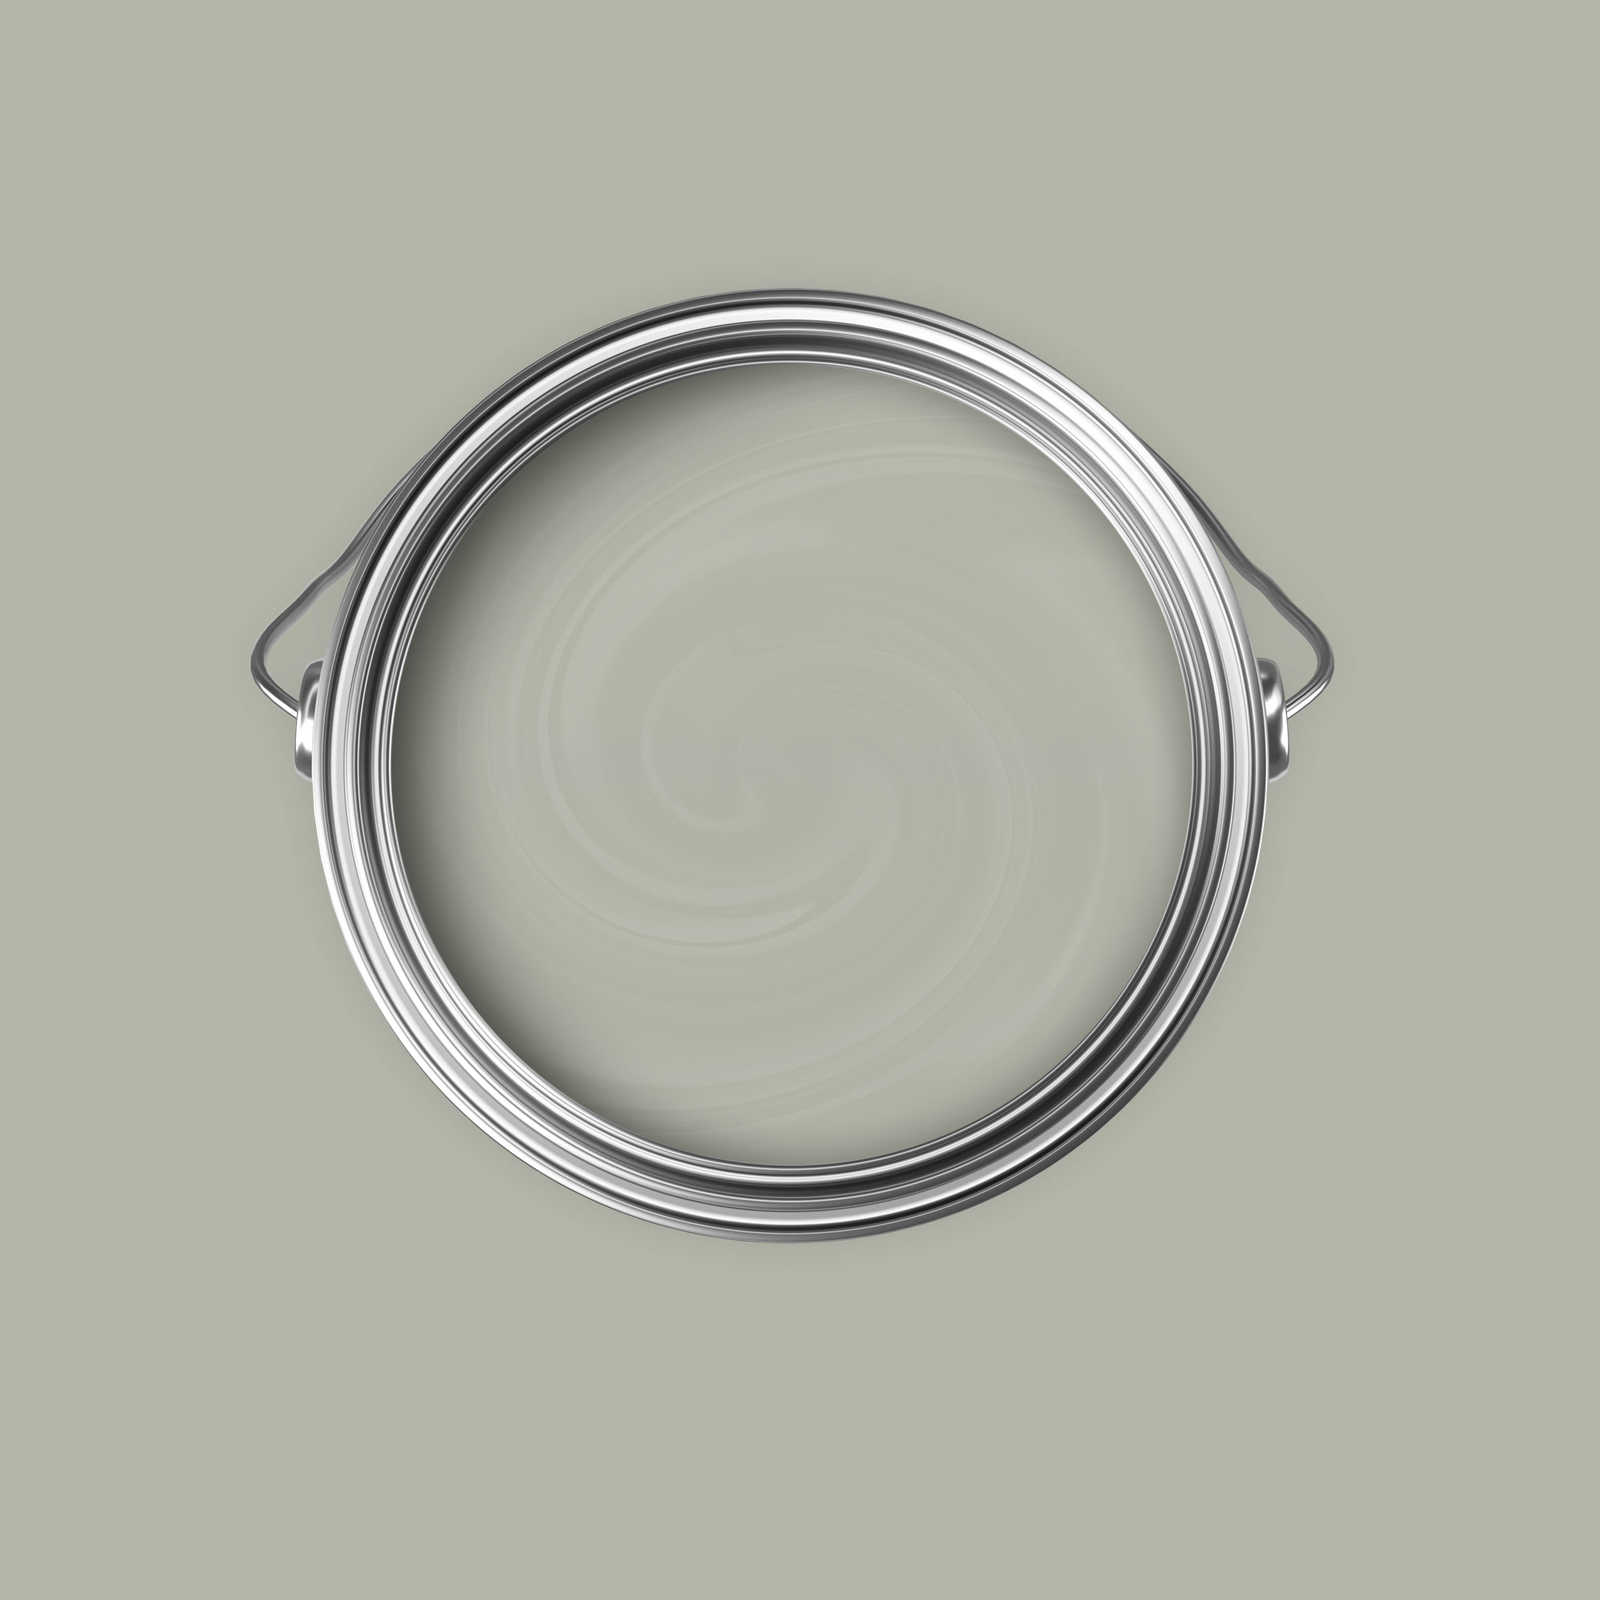             Premium Wall Paint Soft Olive Green »Talented calm taupe« NW705 – 5 litre
        